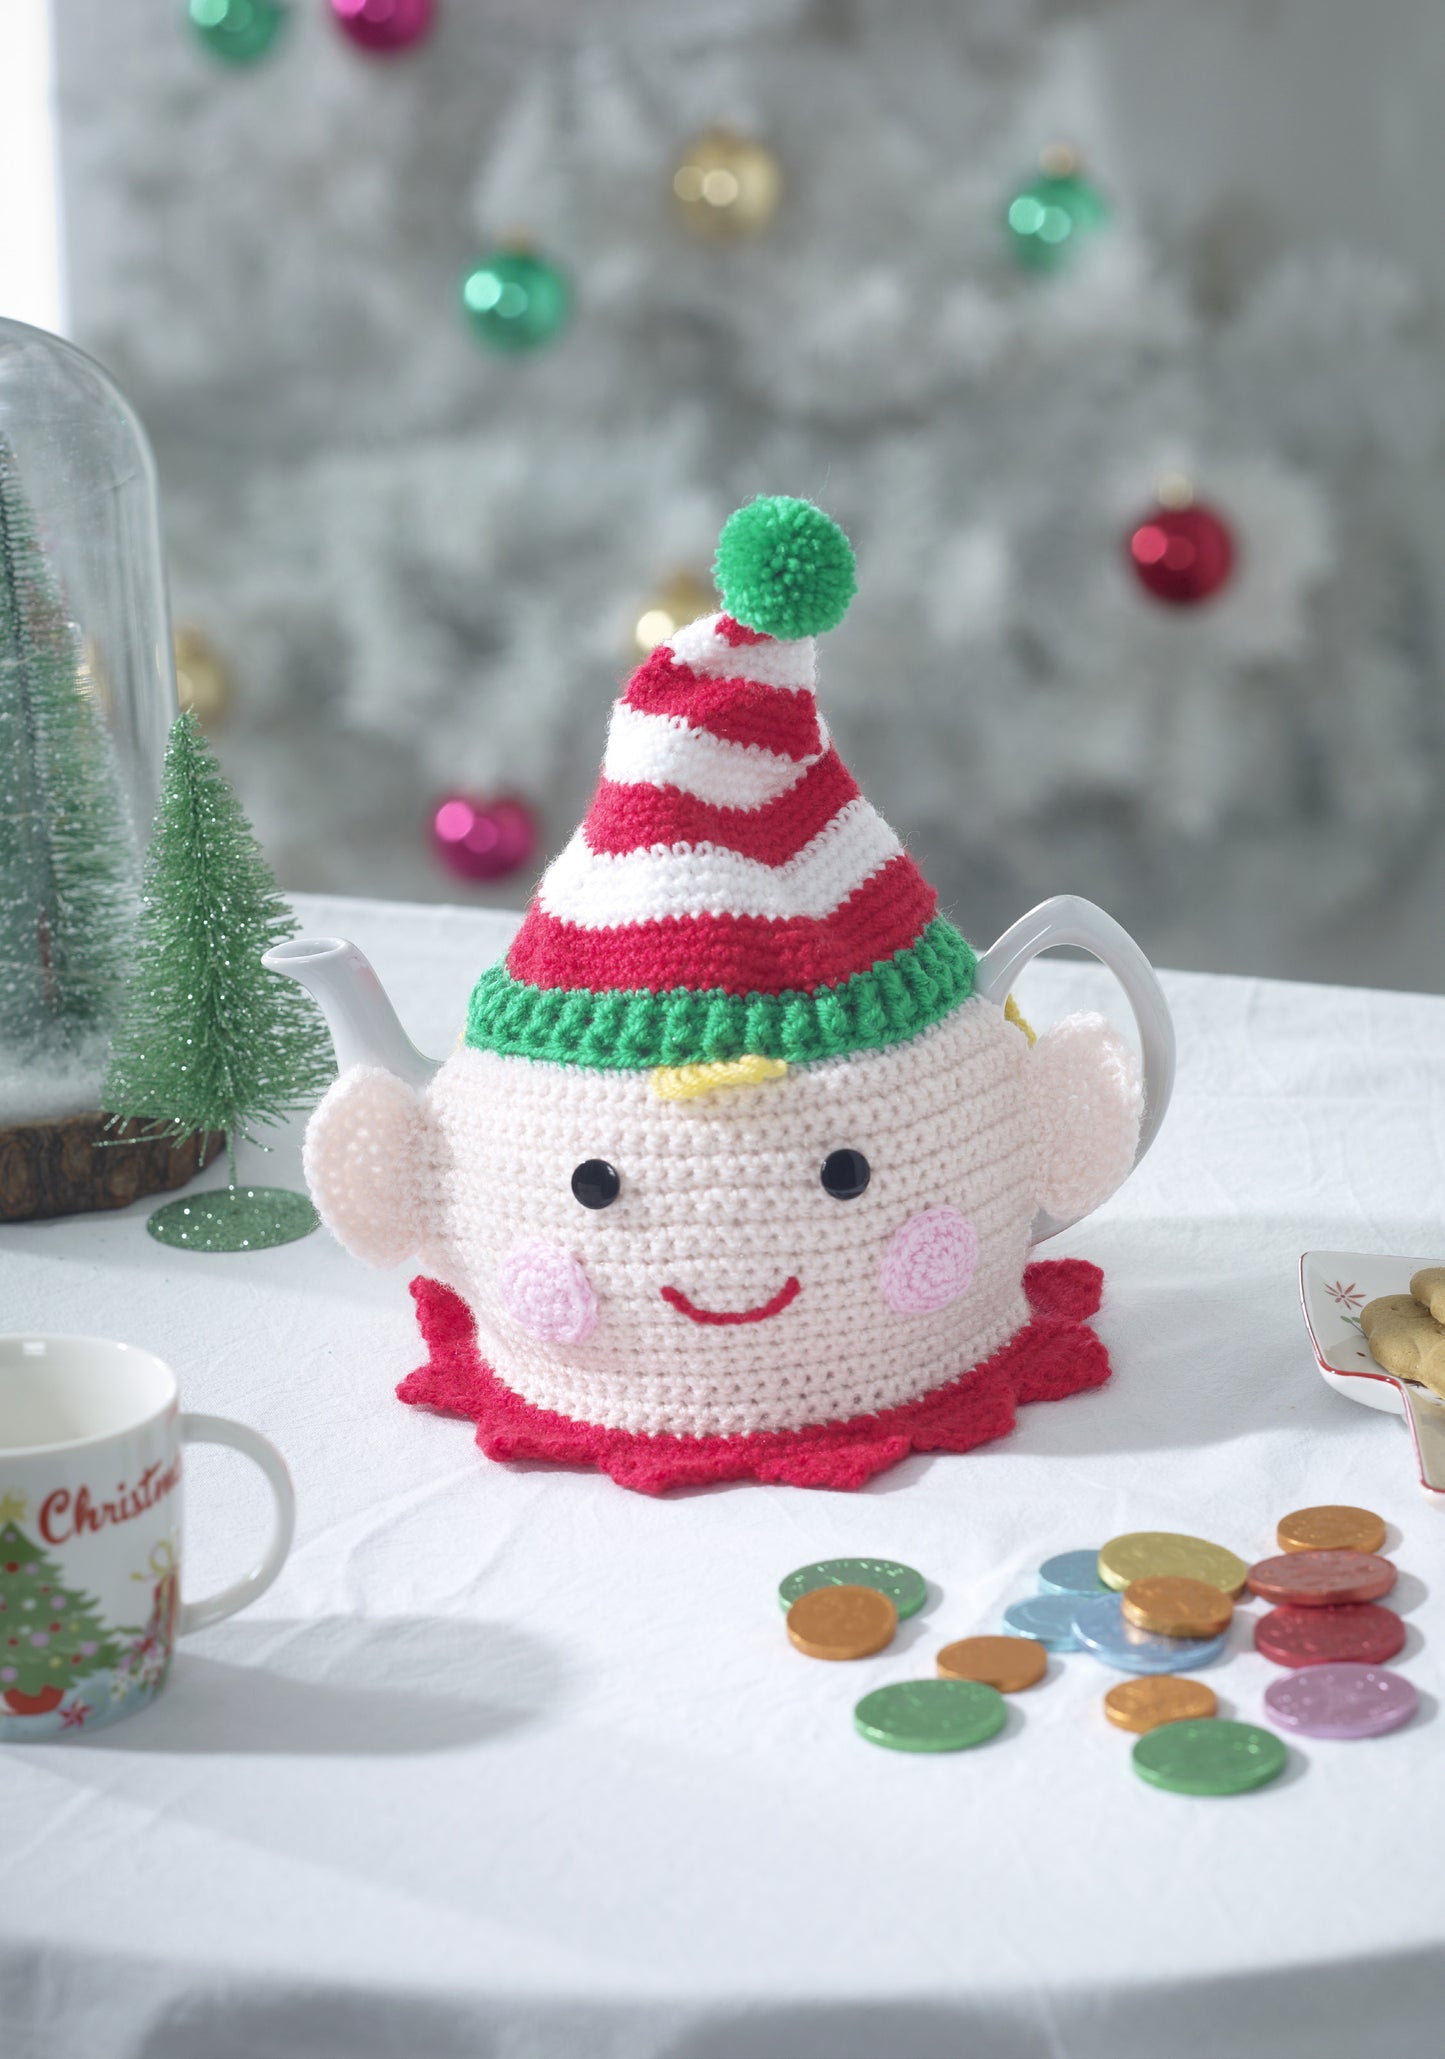 Cute little elf face tea cosy with white and red striped hat with a green bobble. This tea cosy fits a pot of 6 cups, approximately 43cm circumference x 20cm tall.